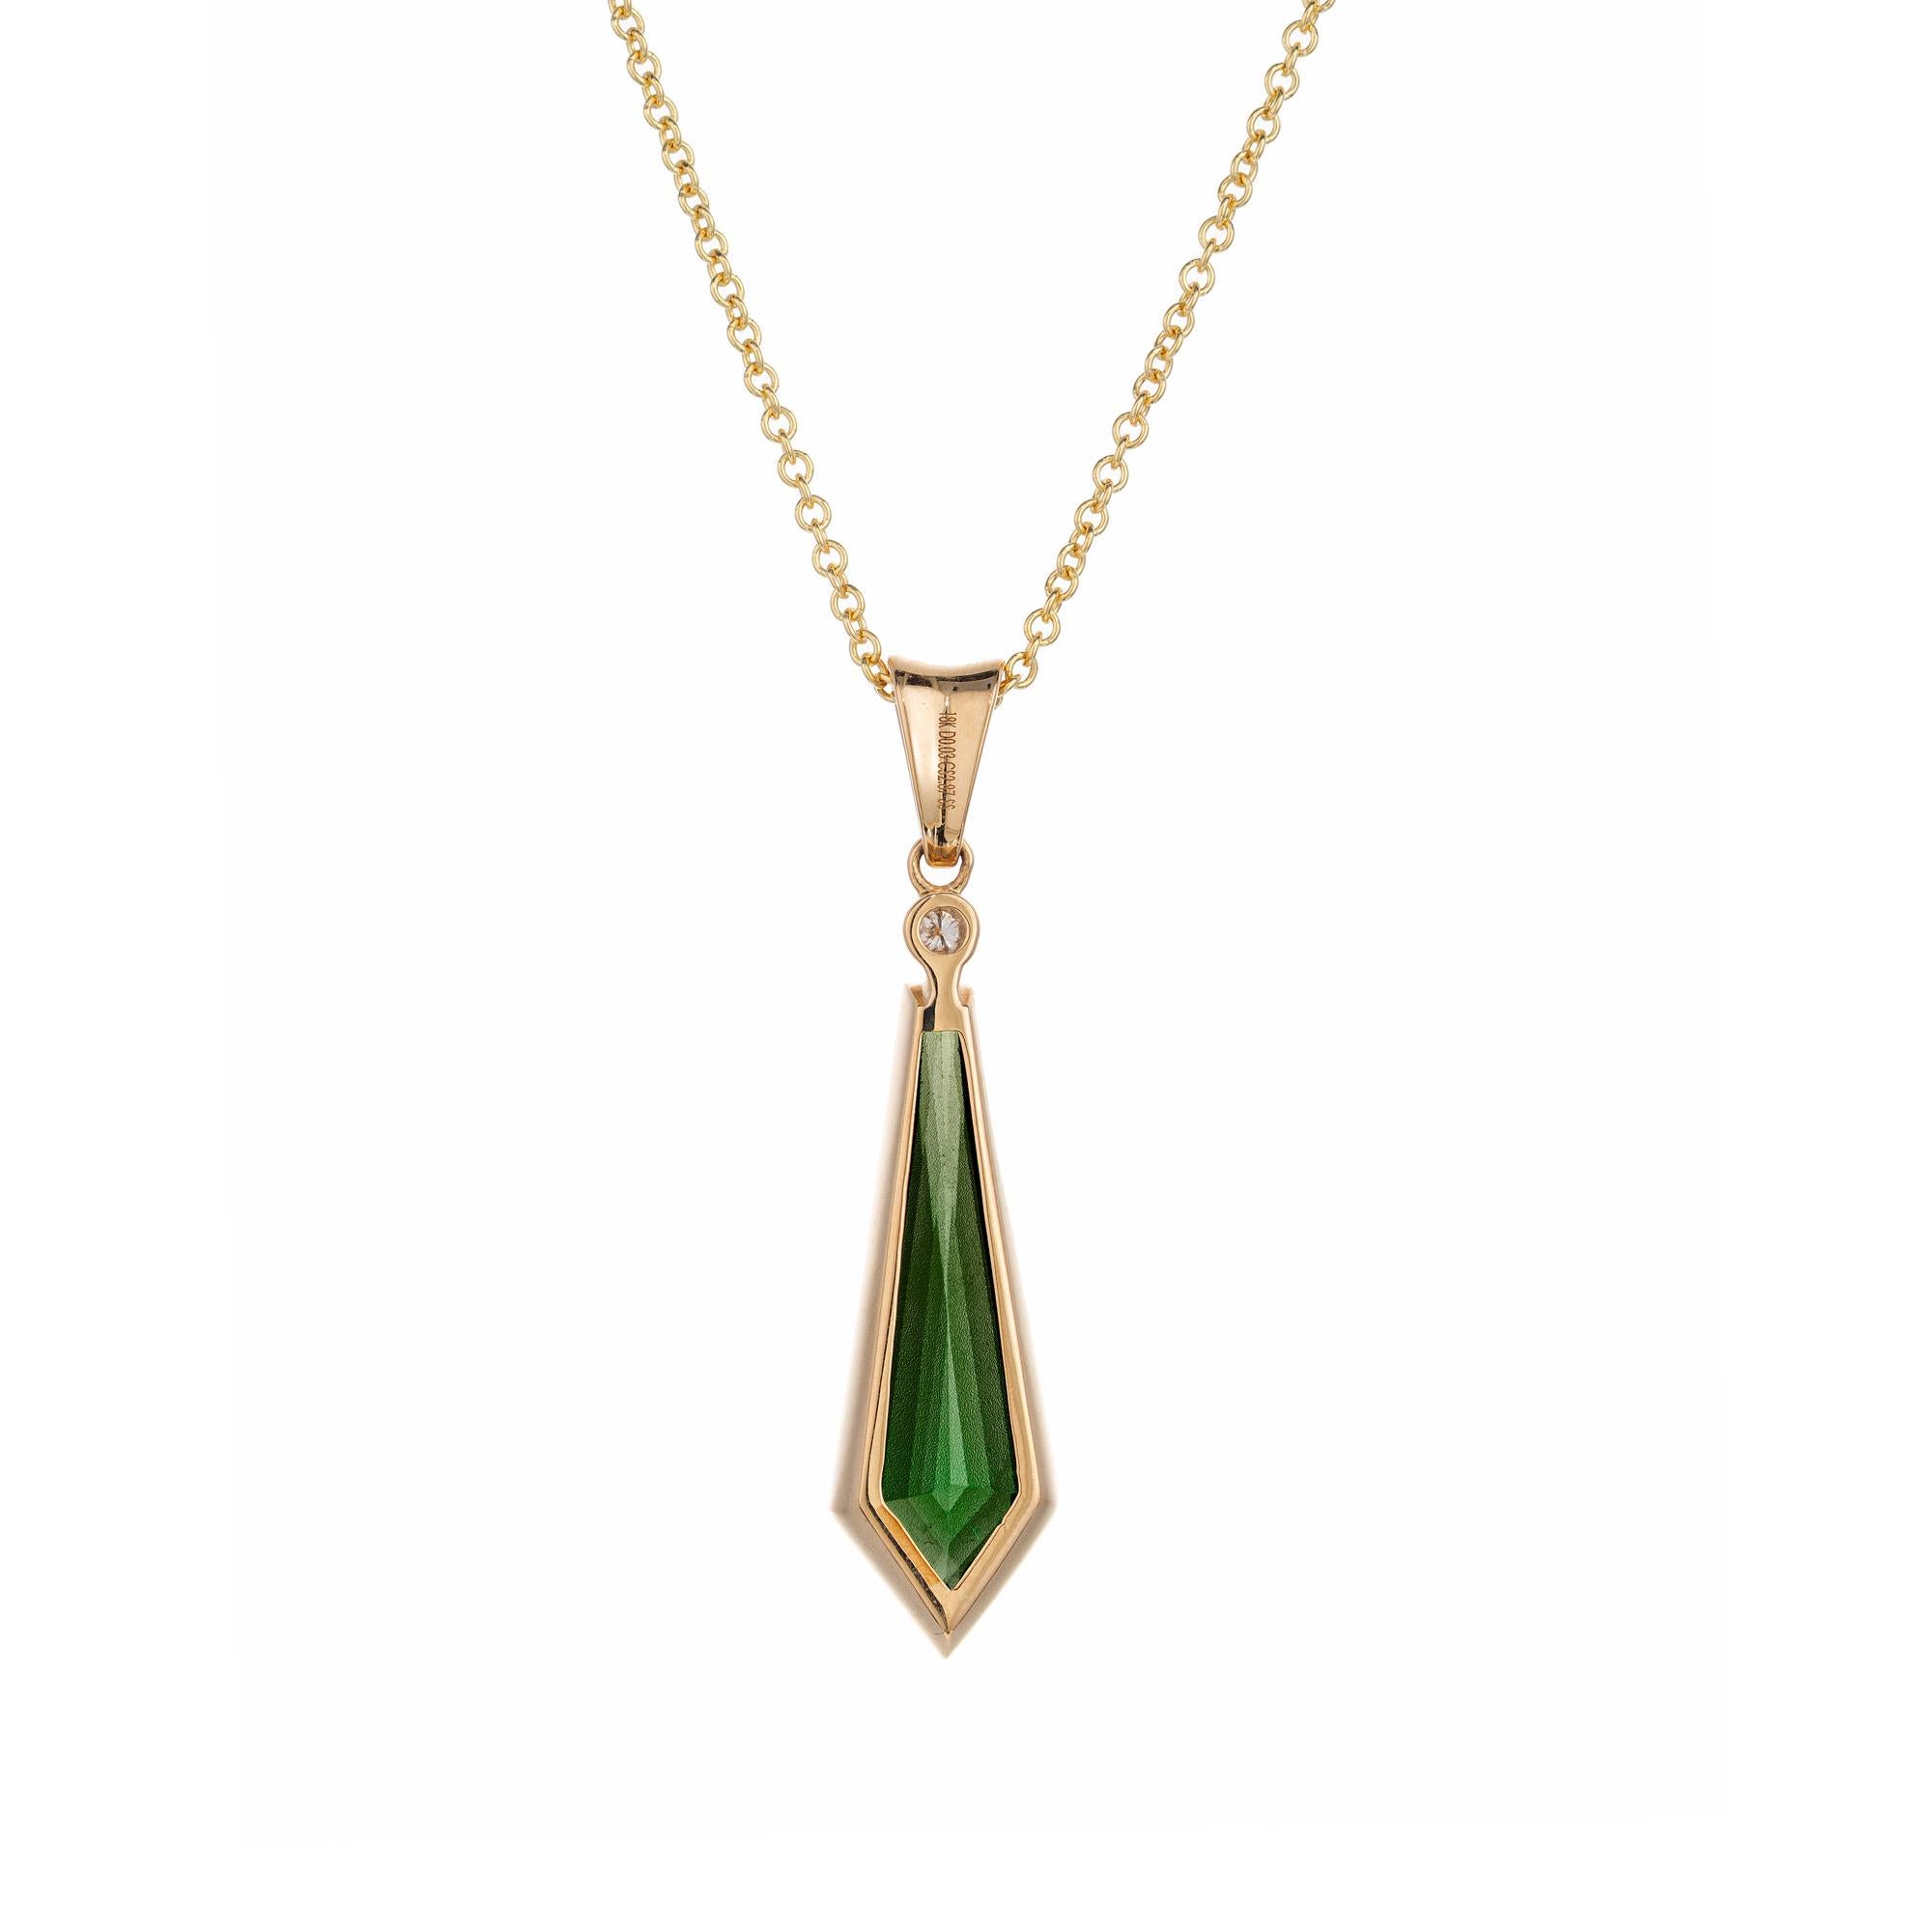 Peter Suchy 2.87 Carat Tourmaline Diamond Yellow Gold Pendant Necklace  In New Condition For Sale In Stamford, CT